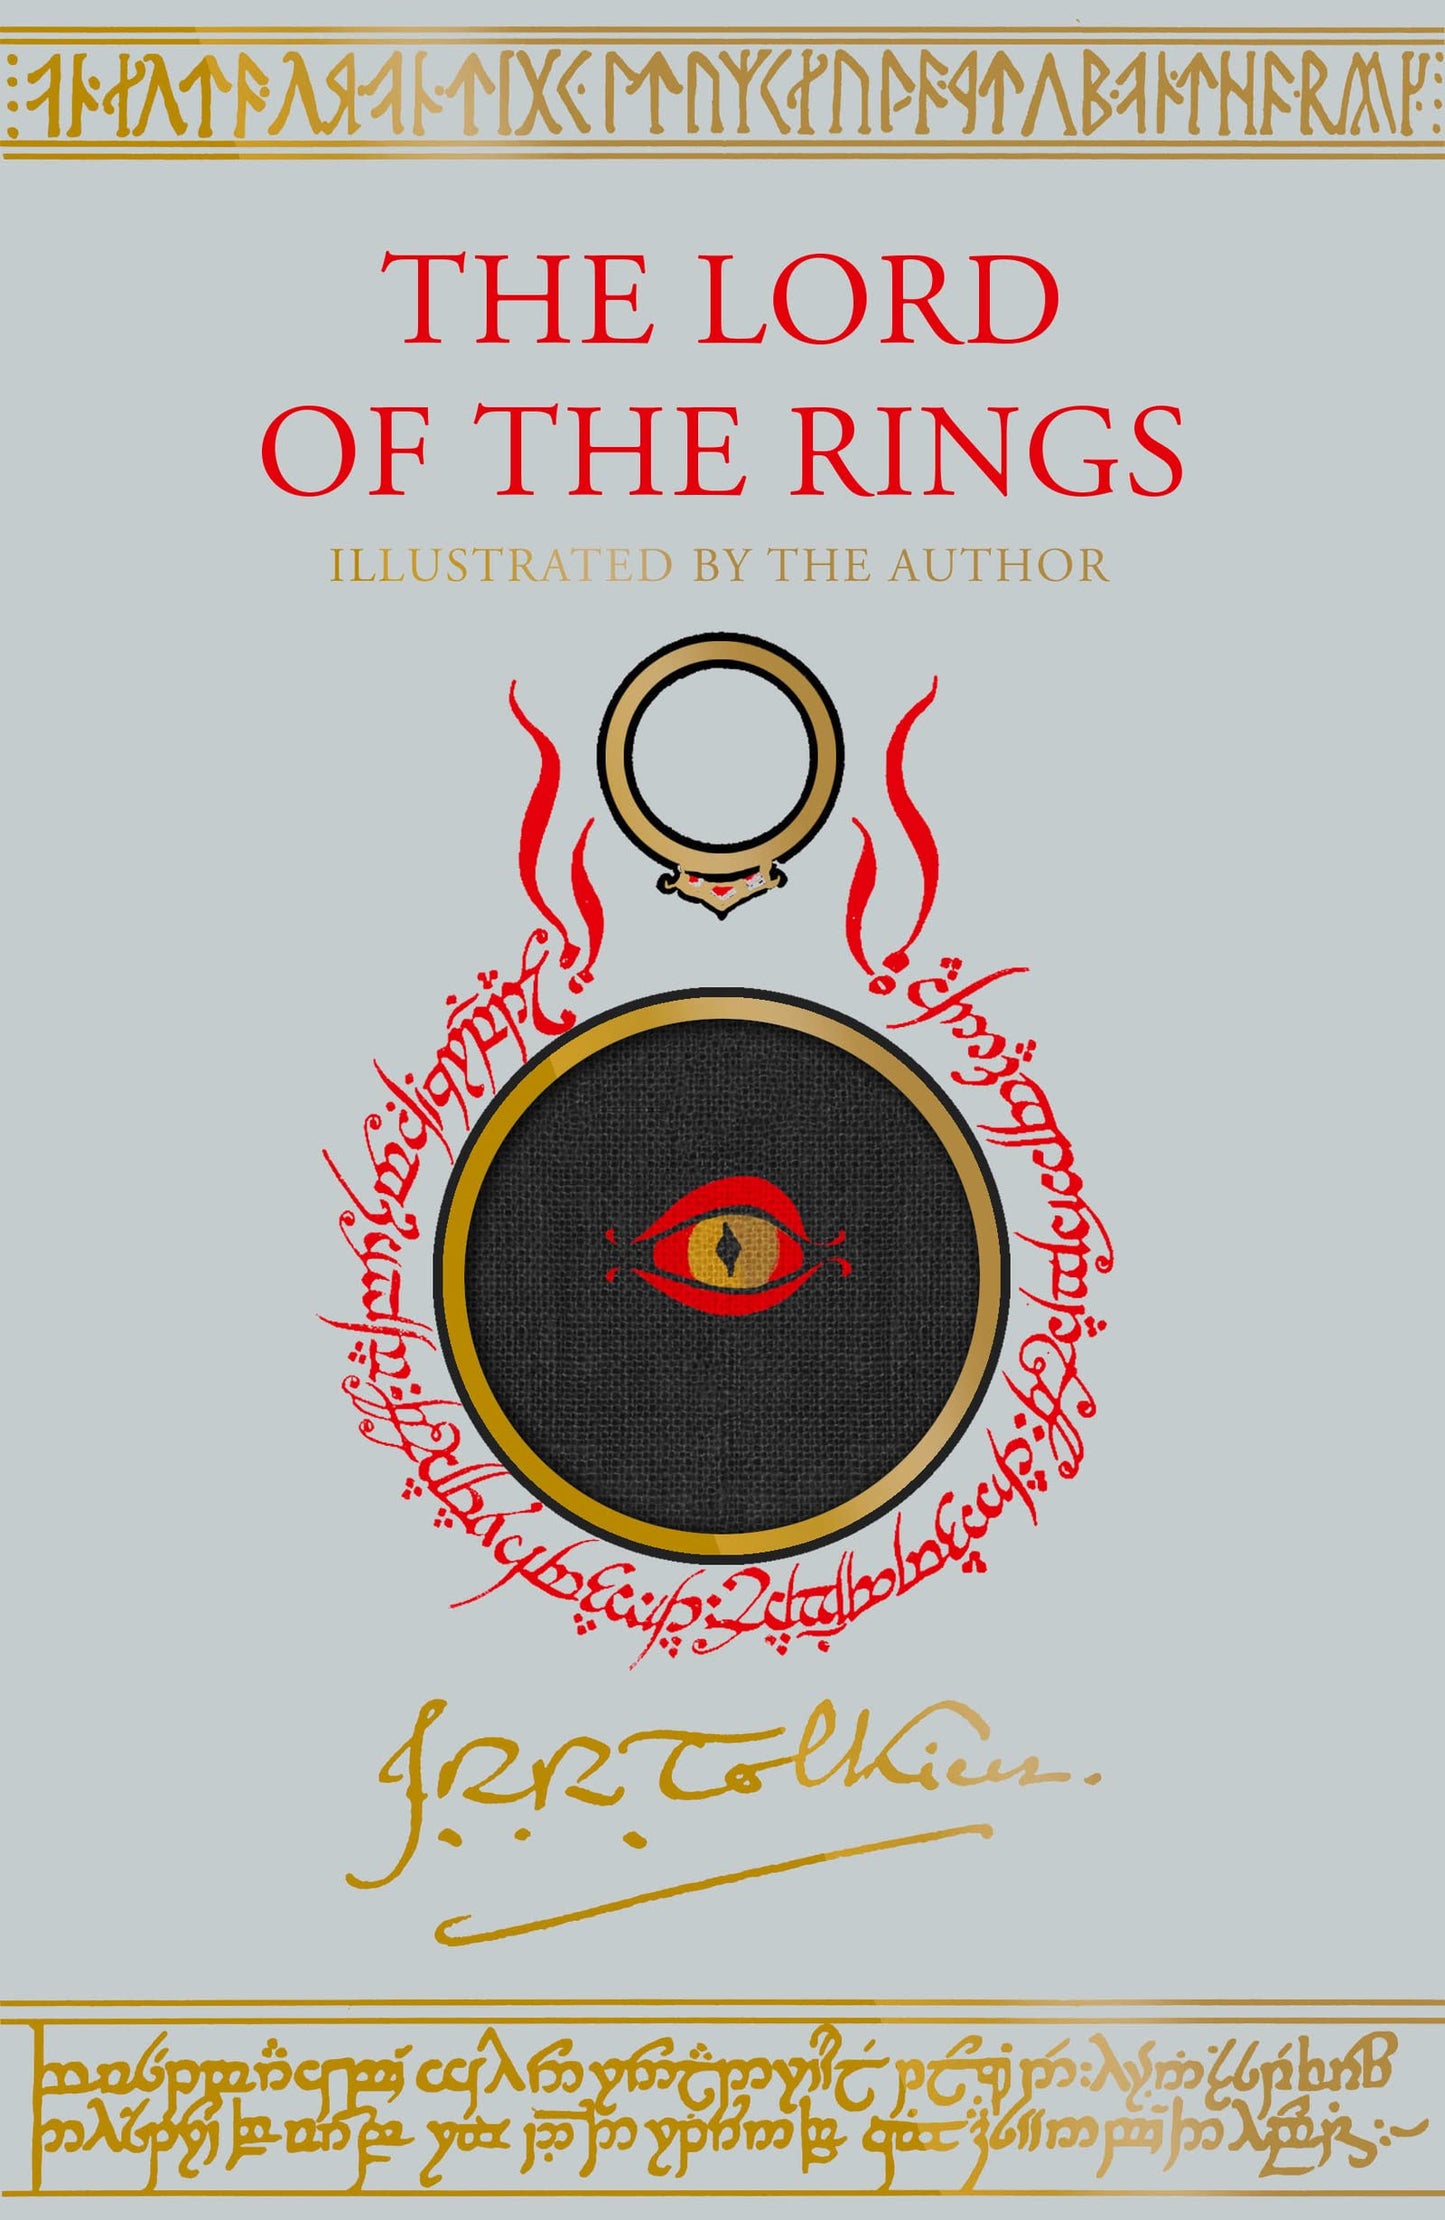 Lord of the Rings (single volume, illustrated by author)